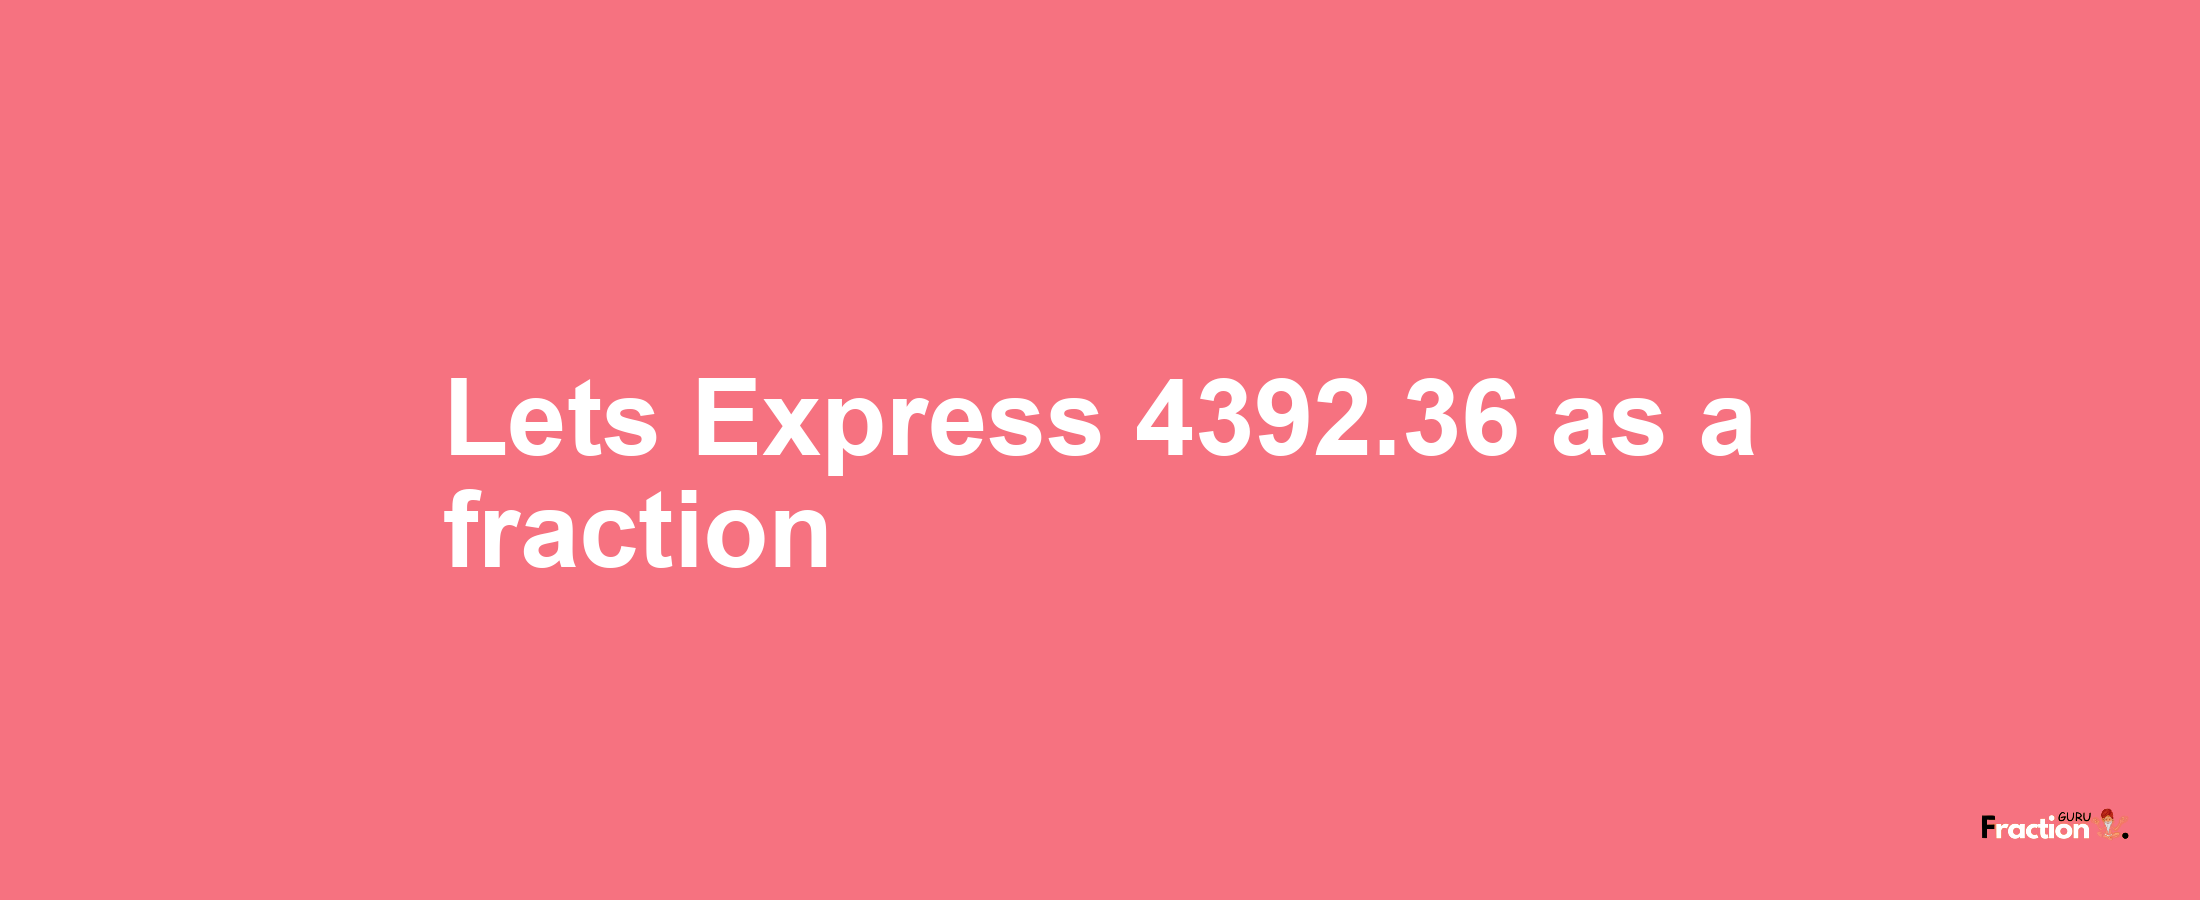 Lets Express 4392.36 as afraction